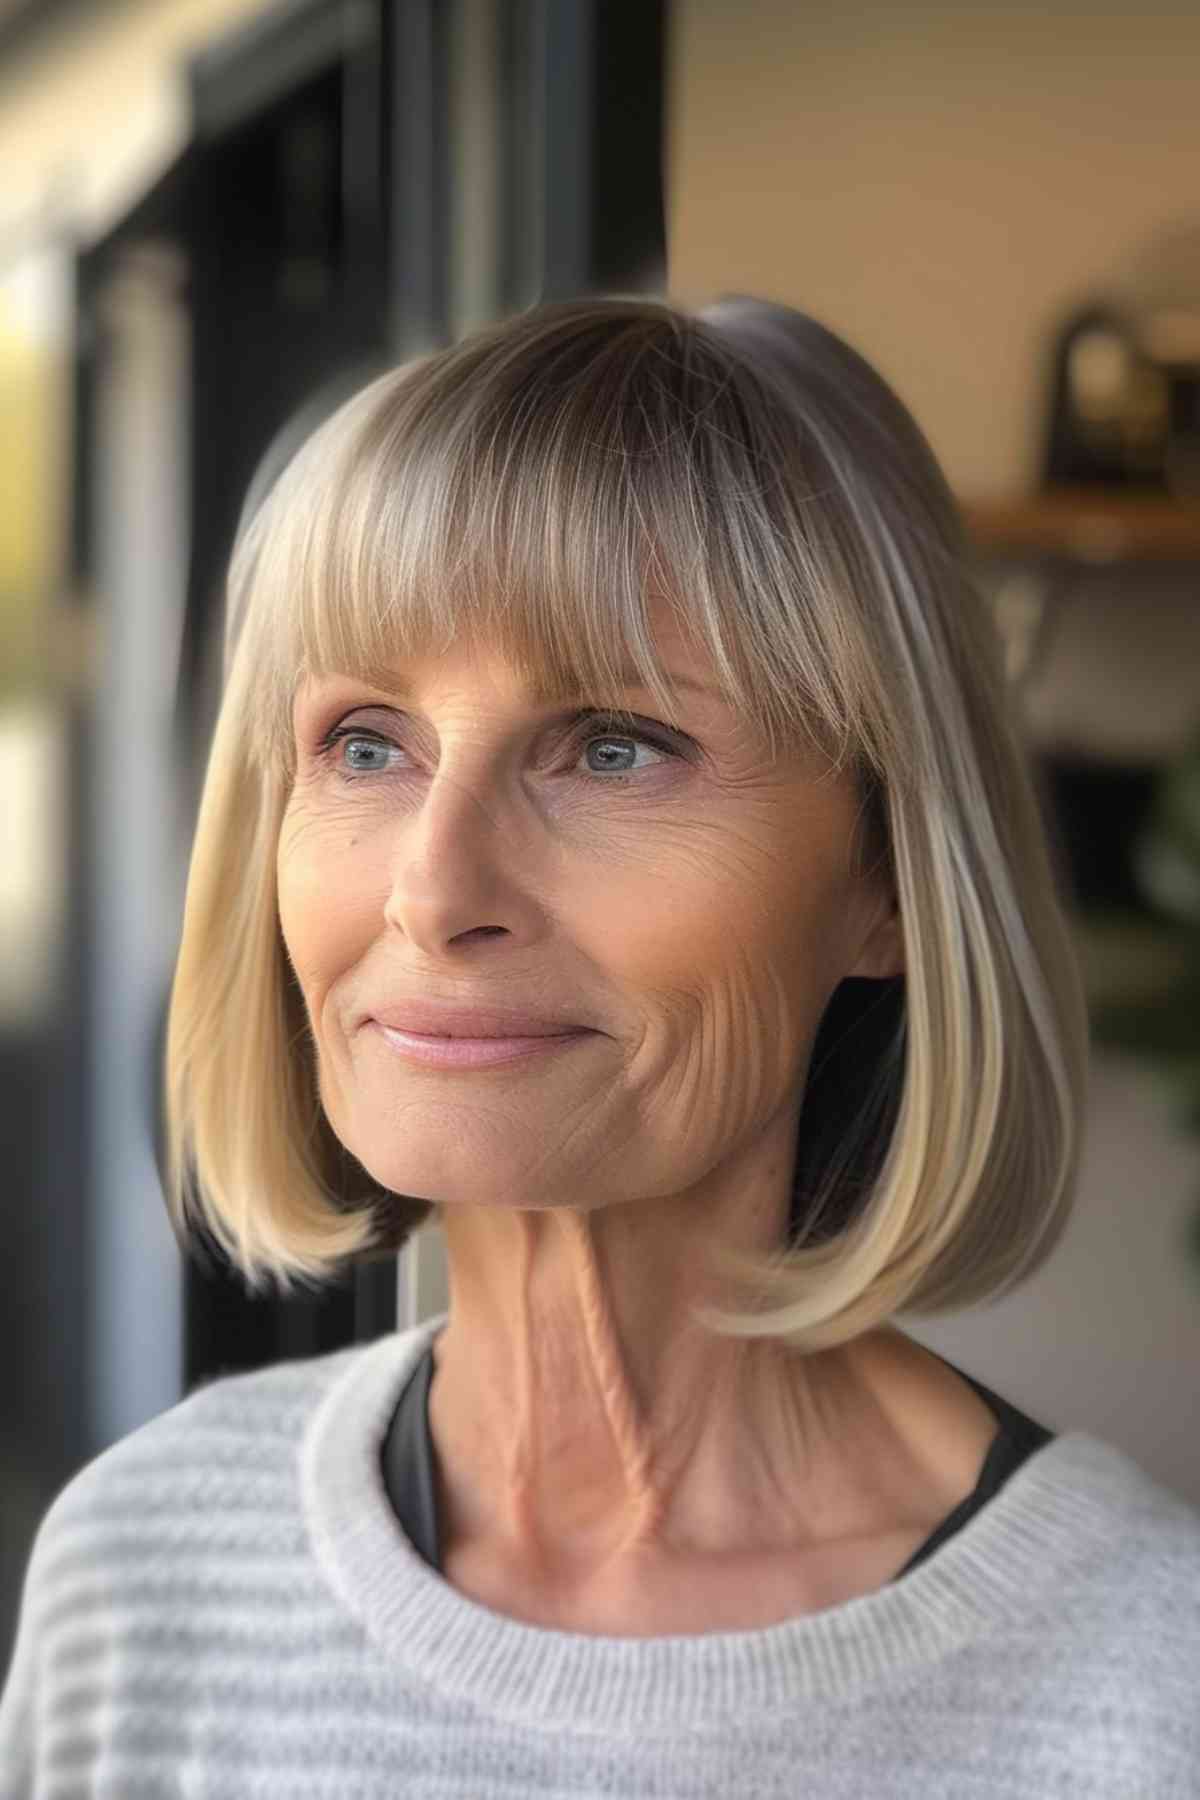 Mature woman with sleek straight bangs and a smooth bob hairstyle, giving a modern and elegant touch.